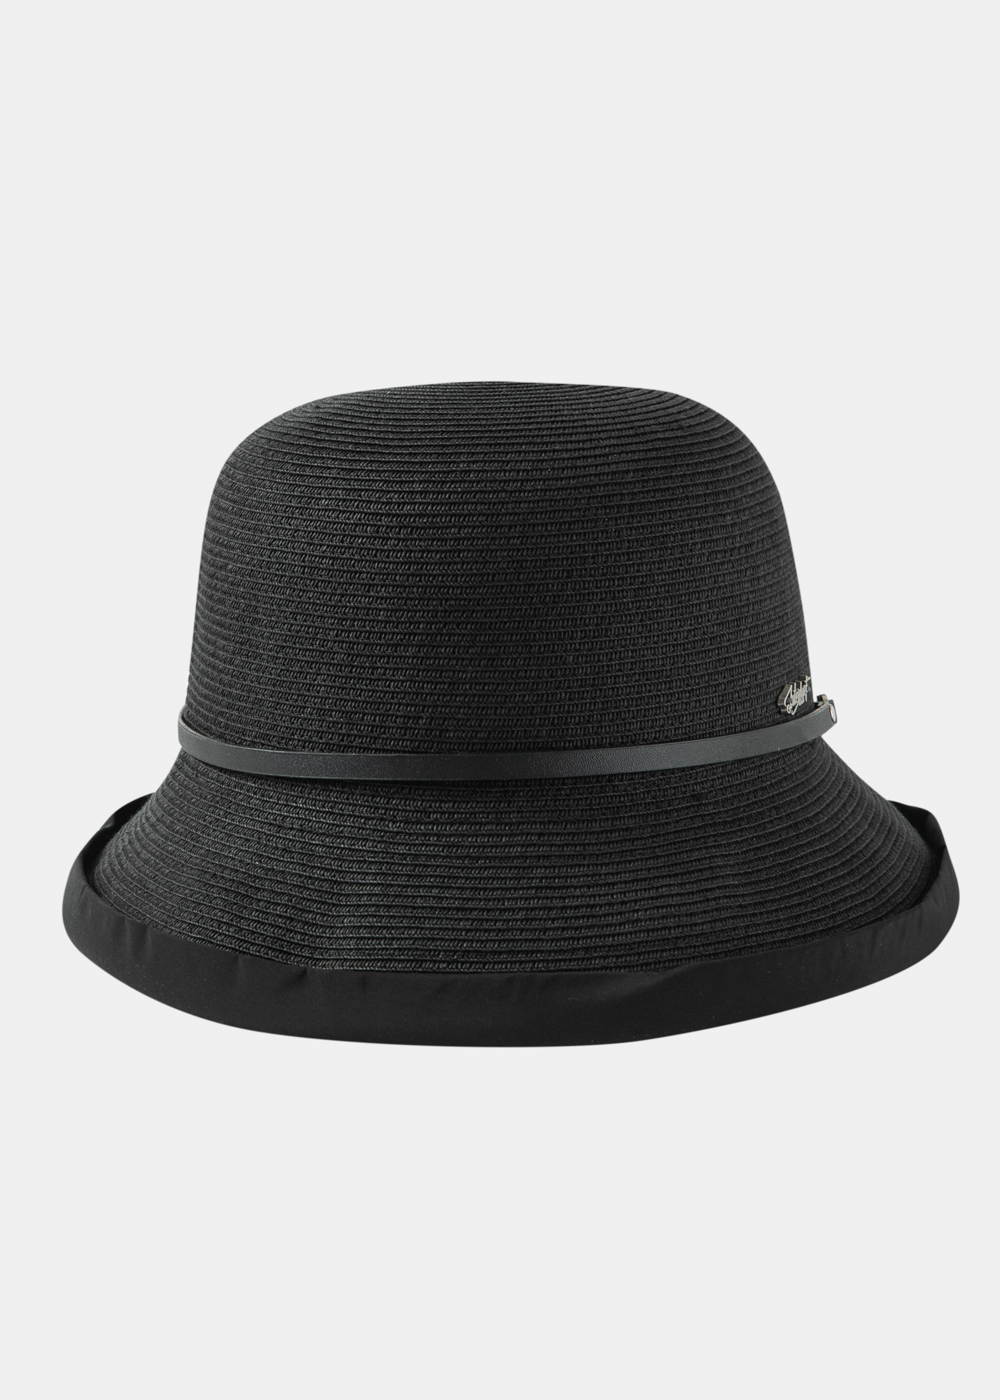 Black Straw Hat w/ Cotton Lining & Leather Detail